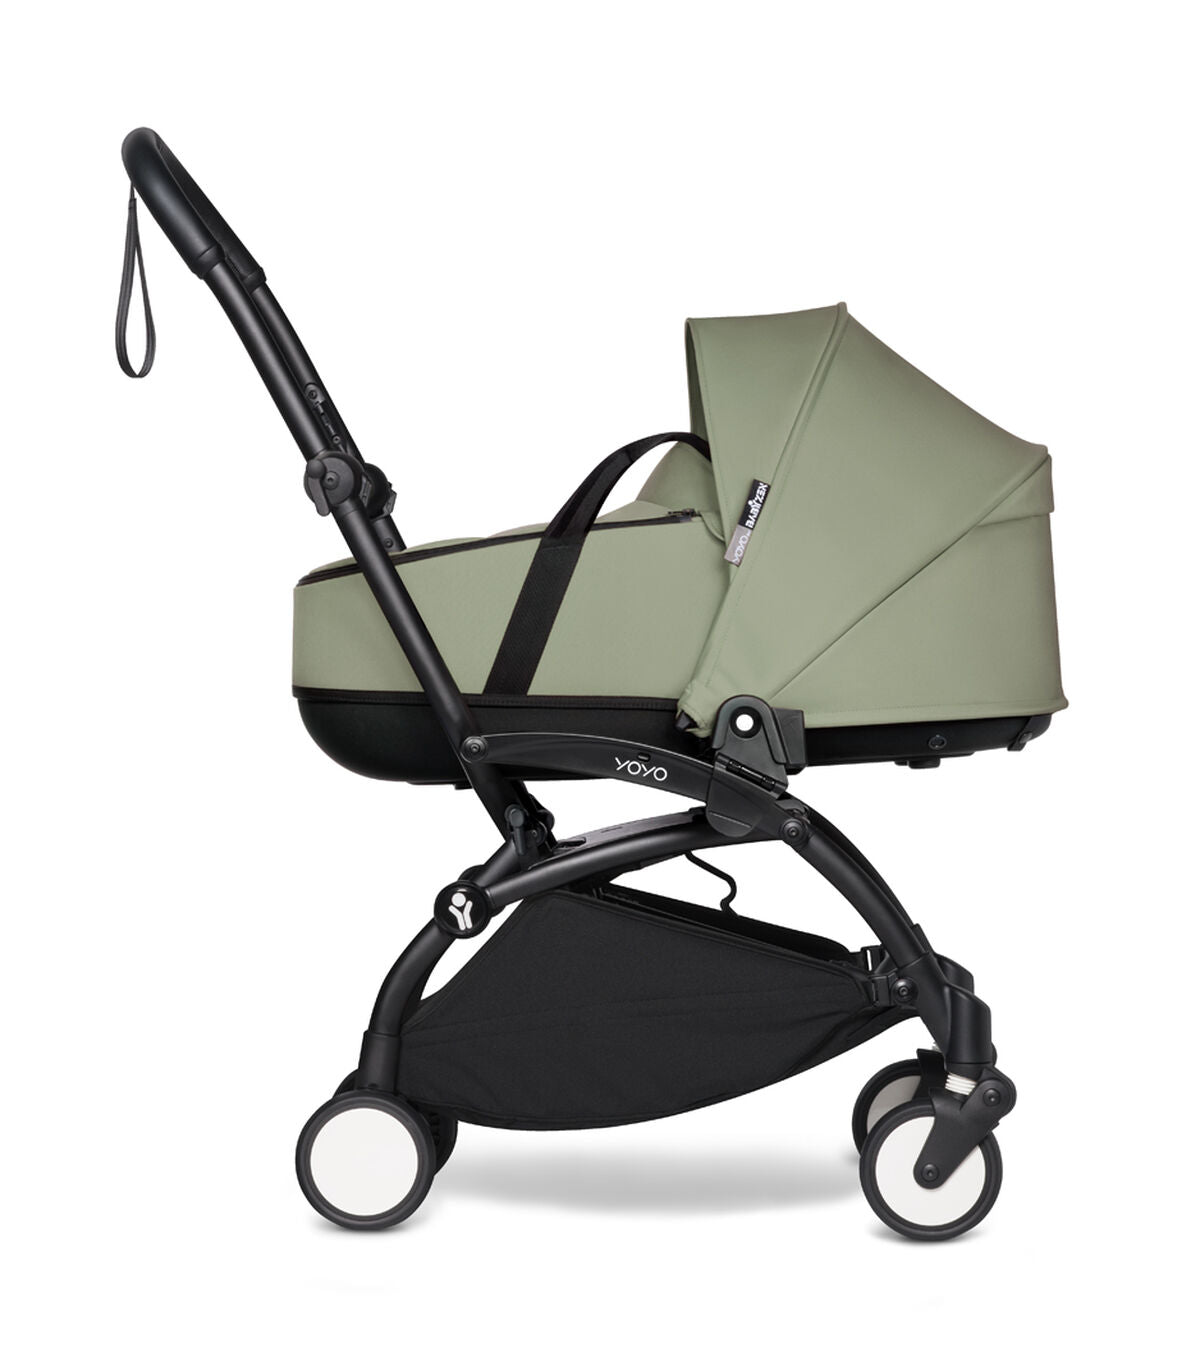 BABYZEN YOYO² (Black Frame) Complete with Bassinet  - Olive with FREE BACKPACK